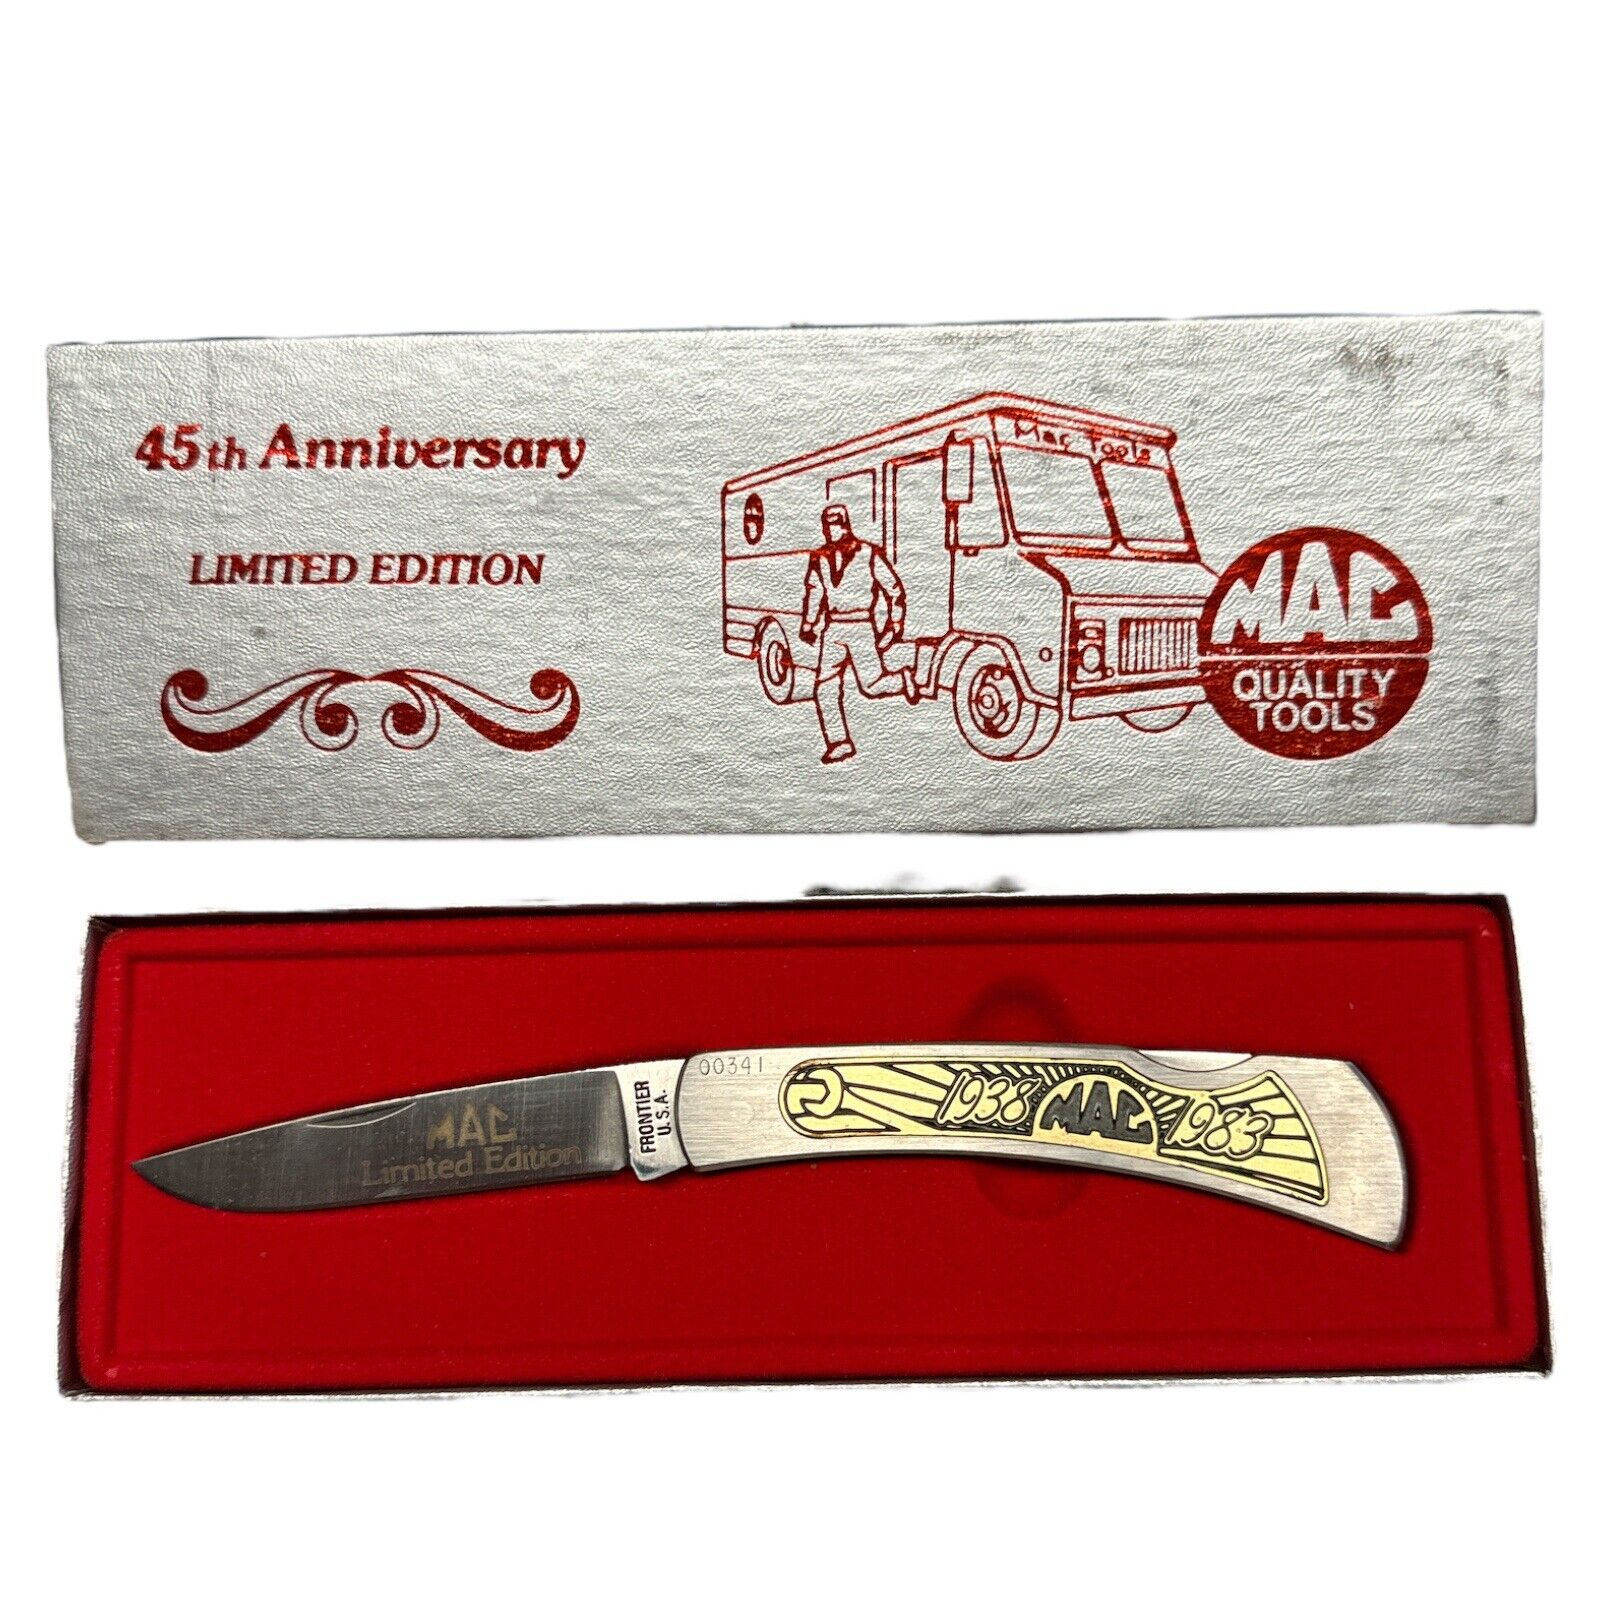 IMPERIAL FRONTIER (P-11) MAC TOOLS 45th Anniversary Knife